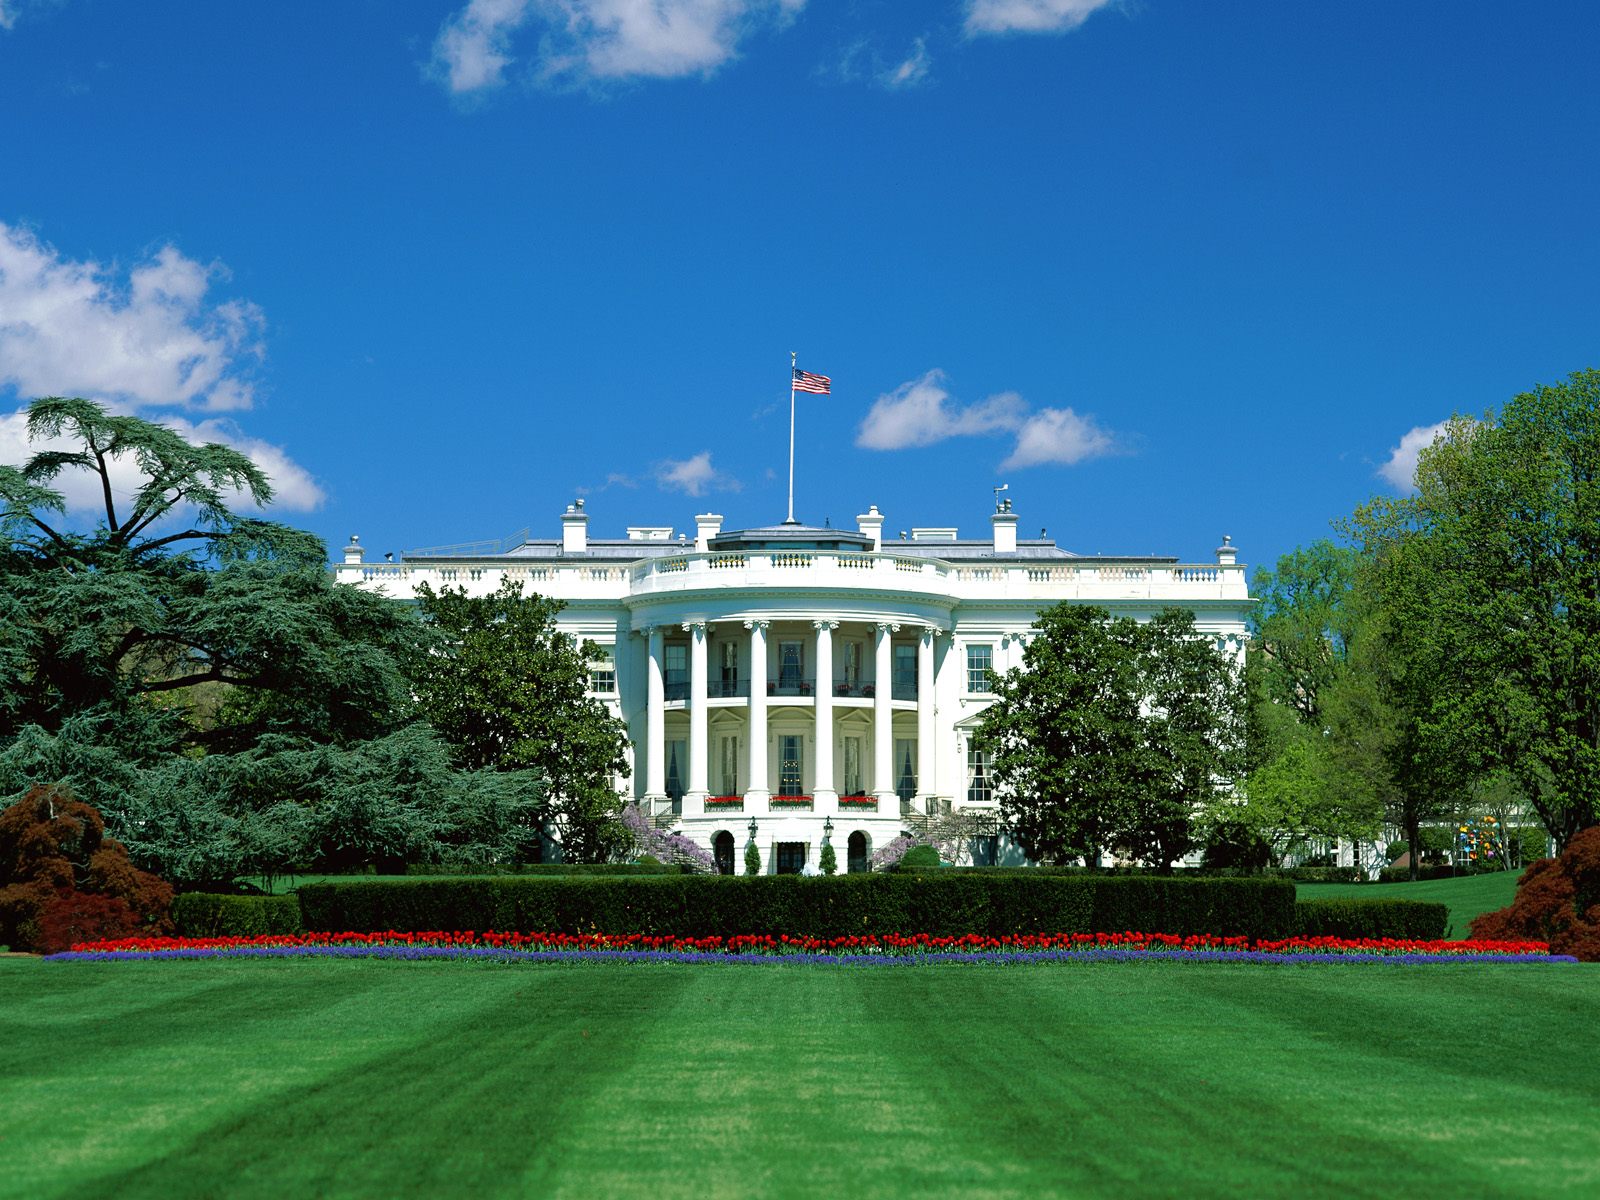 The White House of the USA